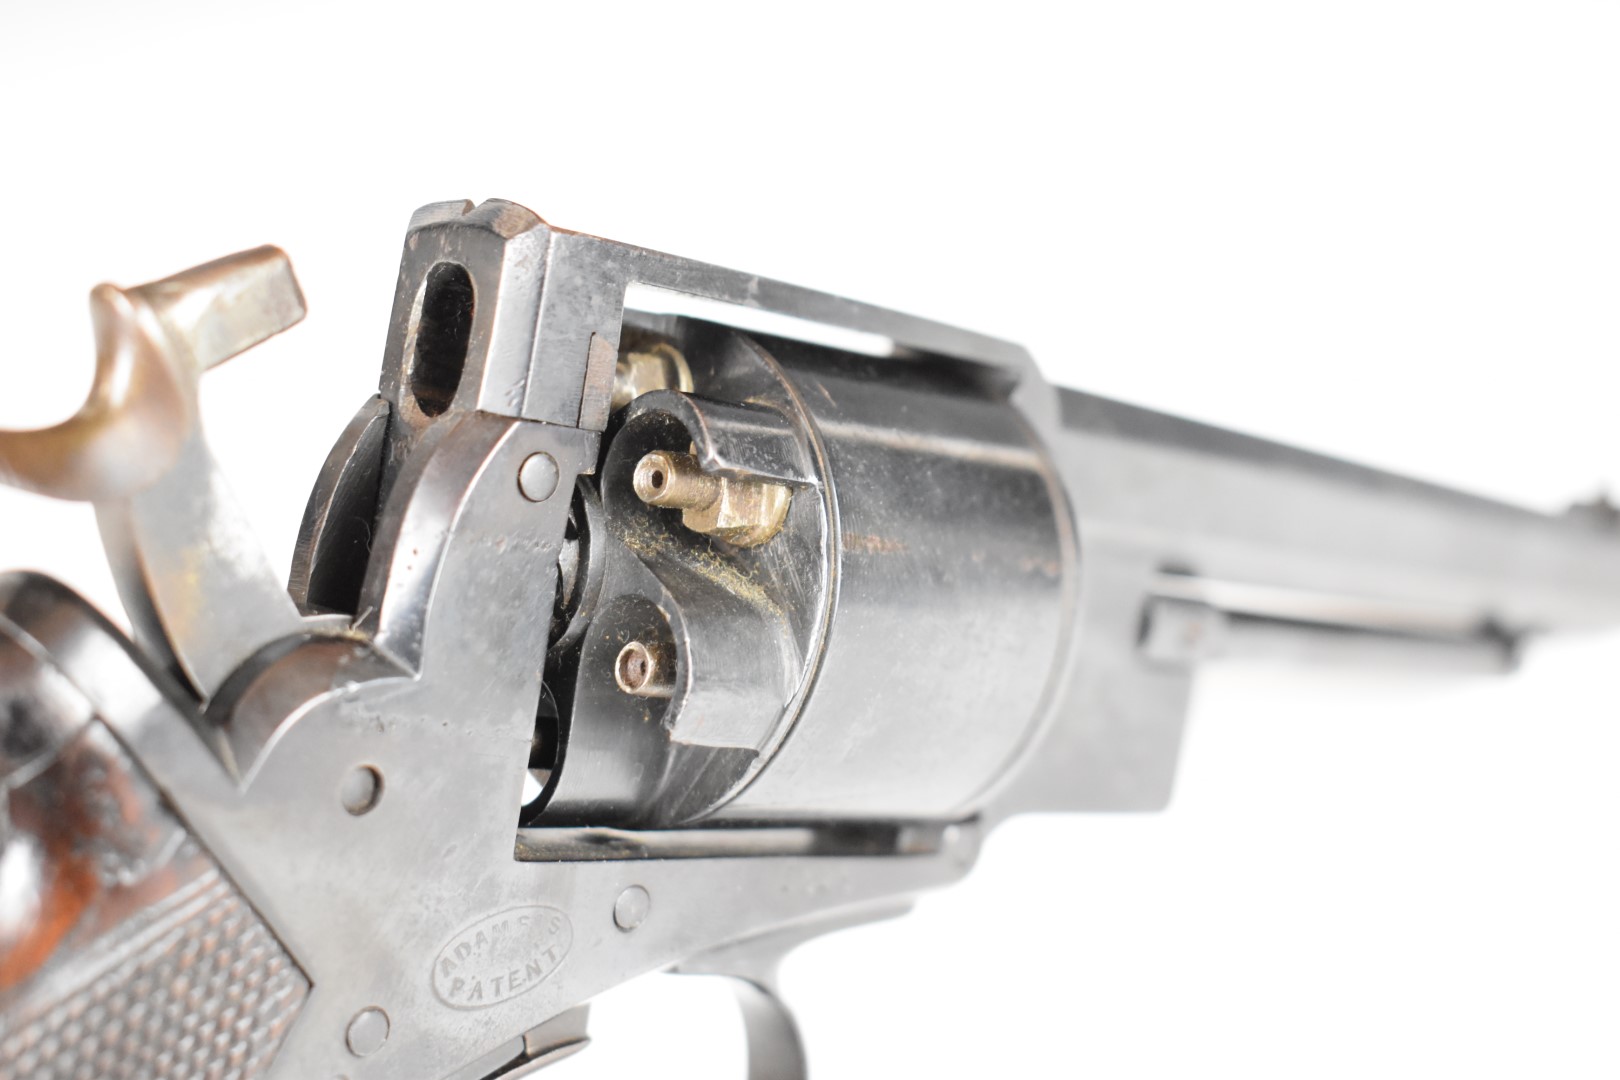 Adam's Patent 50 bore six-shot double-action revolver with chequered grip, line engraved cylinder, - Image 25 of 30